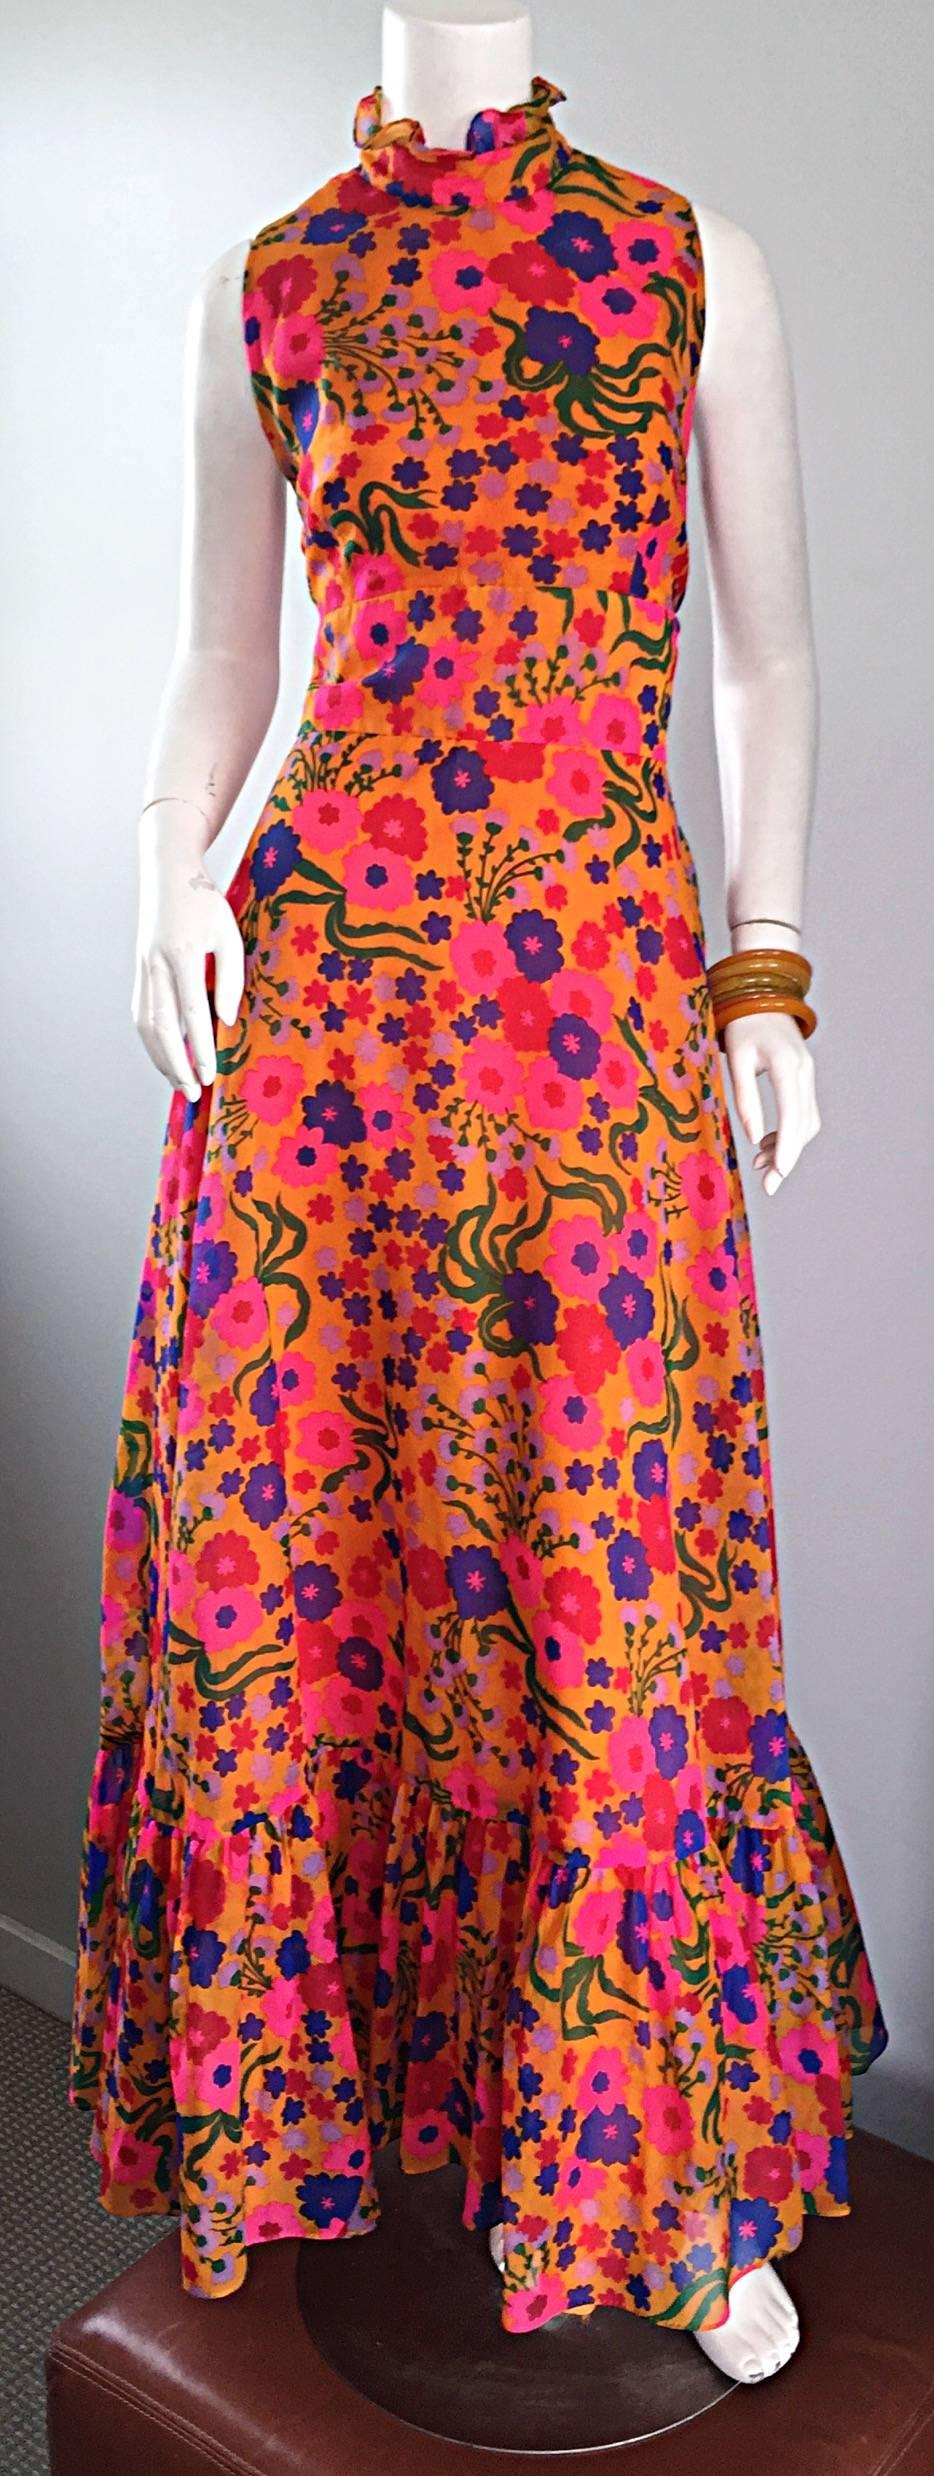 Amazing 1970s 70s Colorful Psychedelic Chiffon Floral Ruffle Vintage Maxi Dress 3